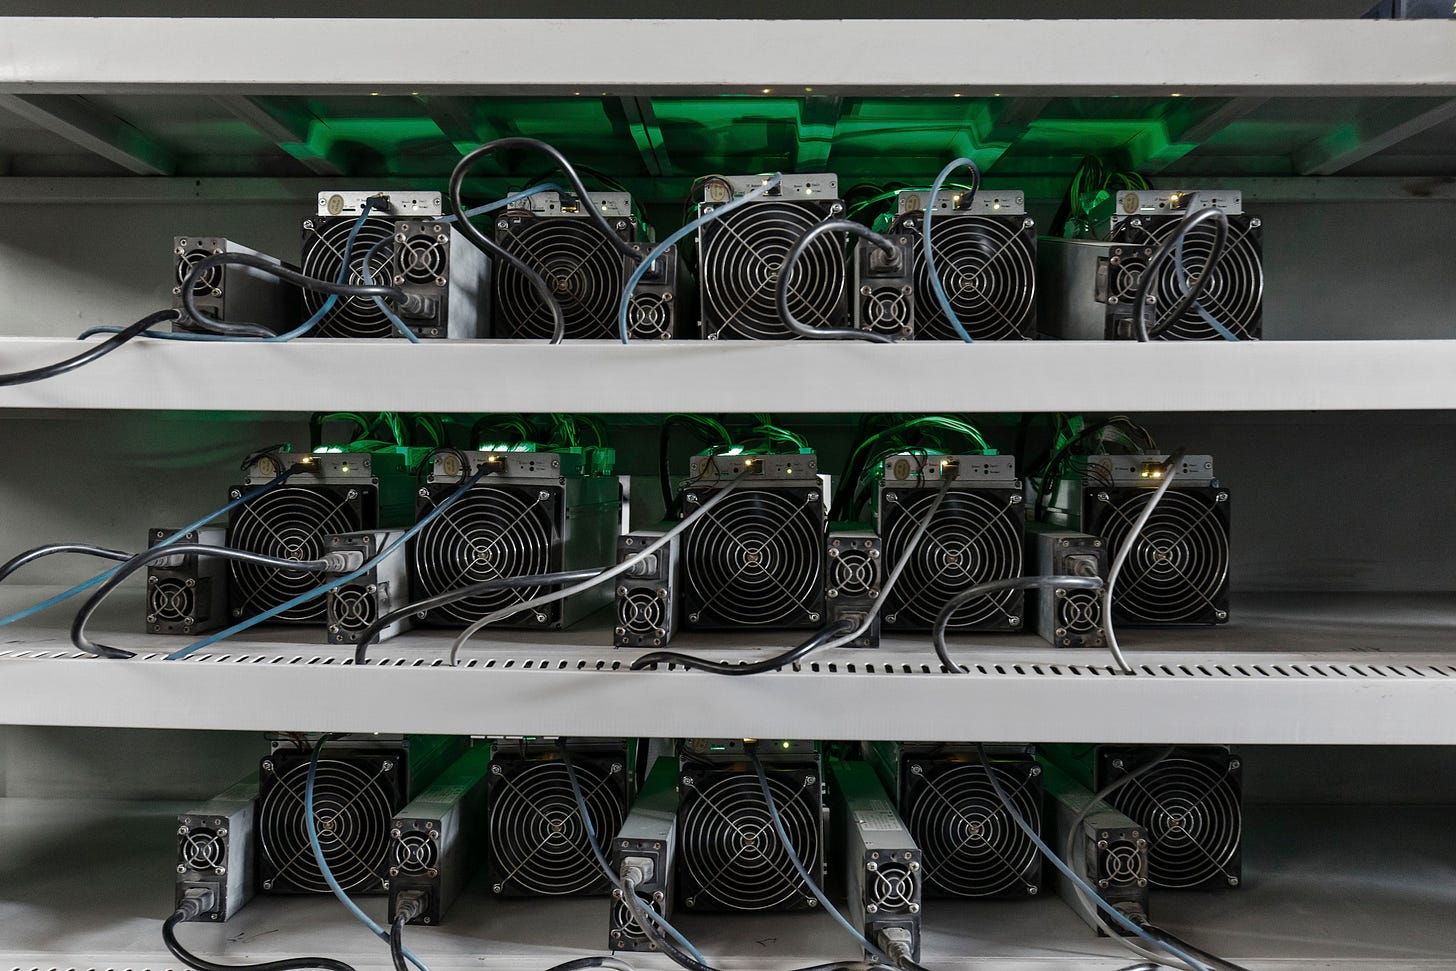 World's Top Bitcoin Mining-Rig Maker Halts Sales as Clients Flee - Bloomberg